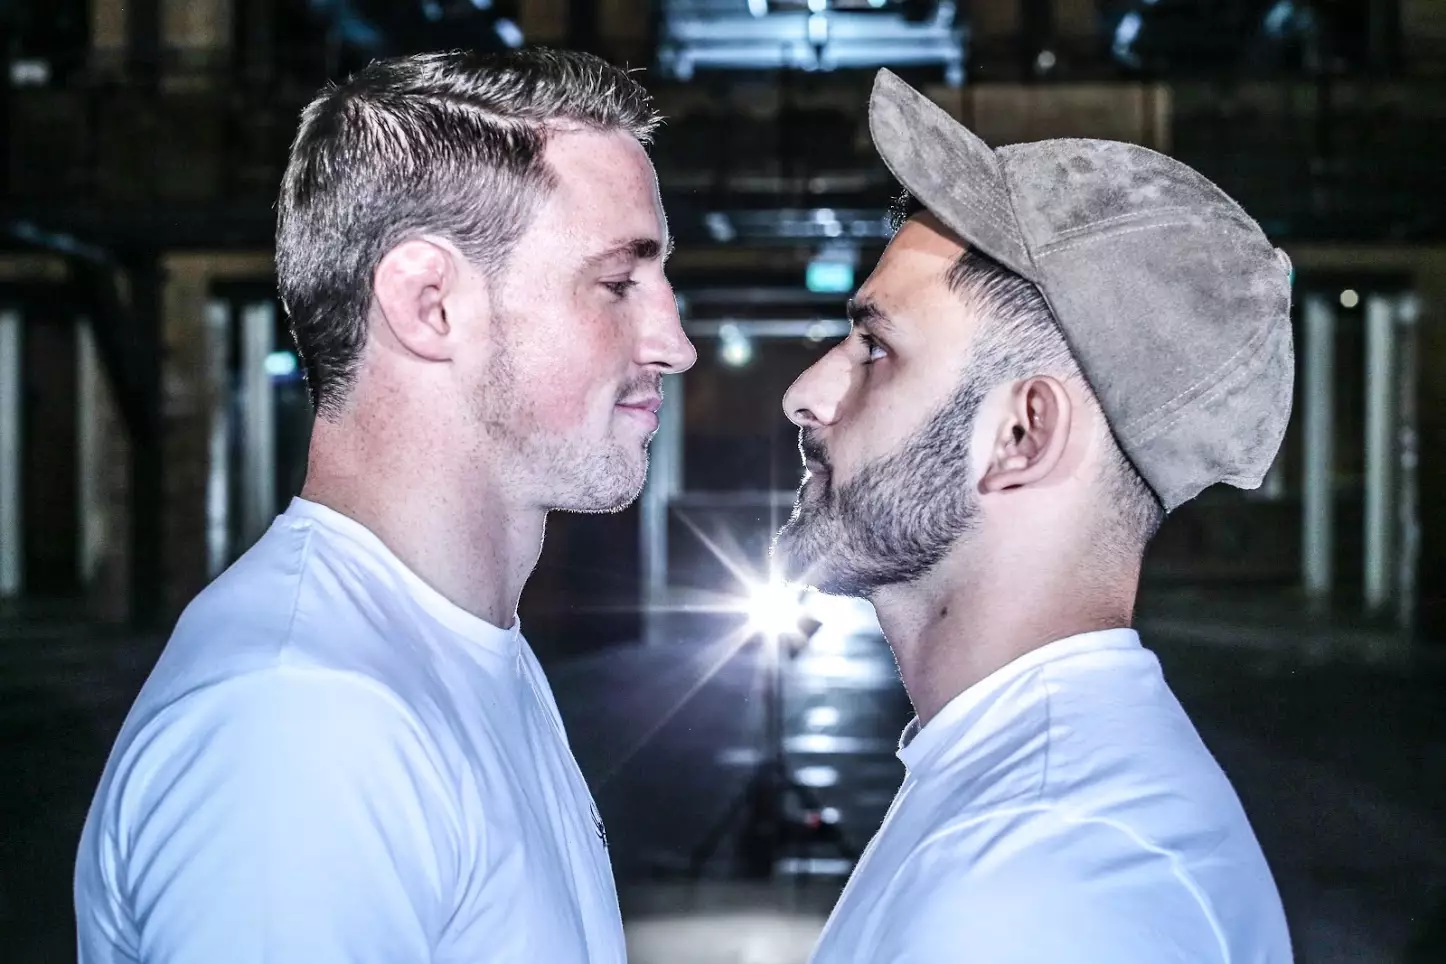 WATCH: Brendan Loughnane And Eden Newton Come Face-To-Face In Heated Exchange  